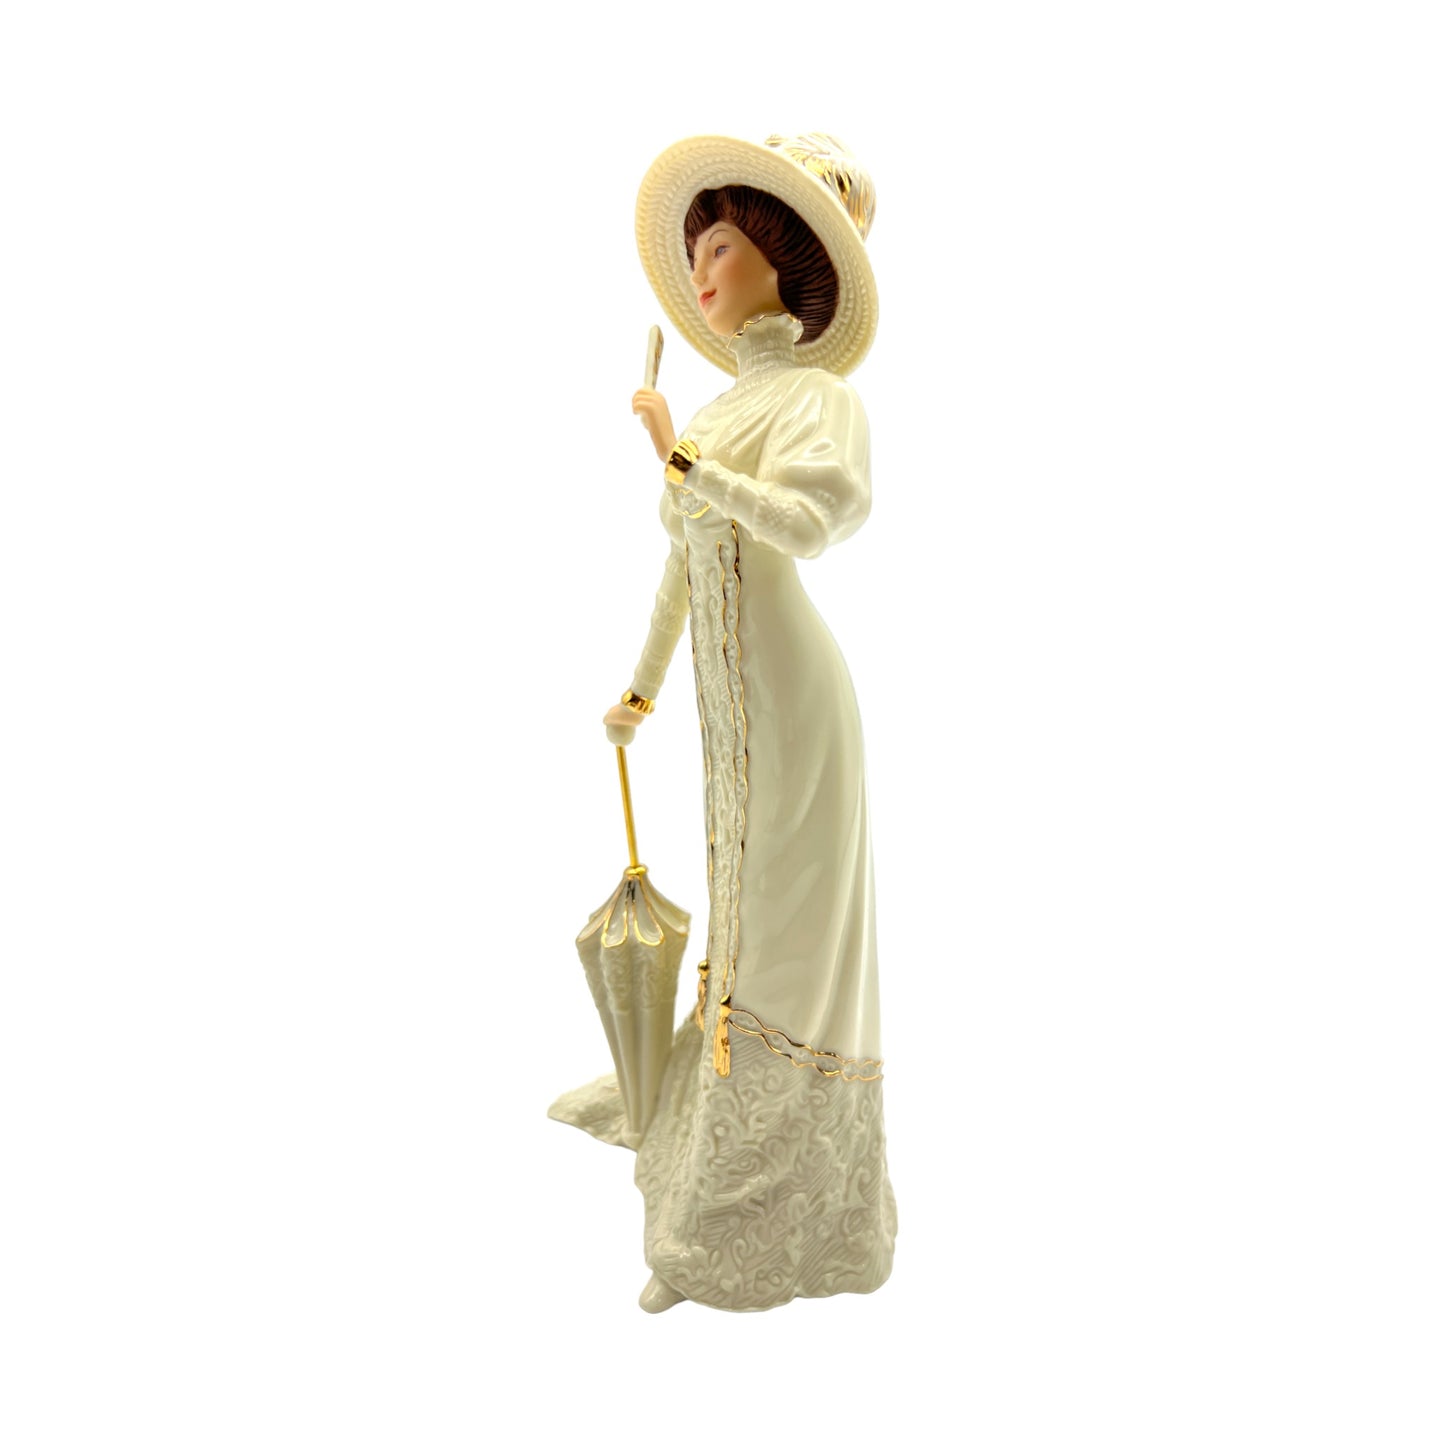 Lenox - Afternoon At Ascot Figurine - Victorian Ladies Of Fashion Collection - Original Box - 9.25"